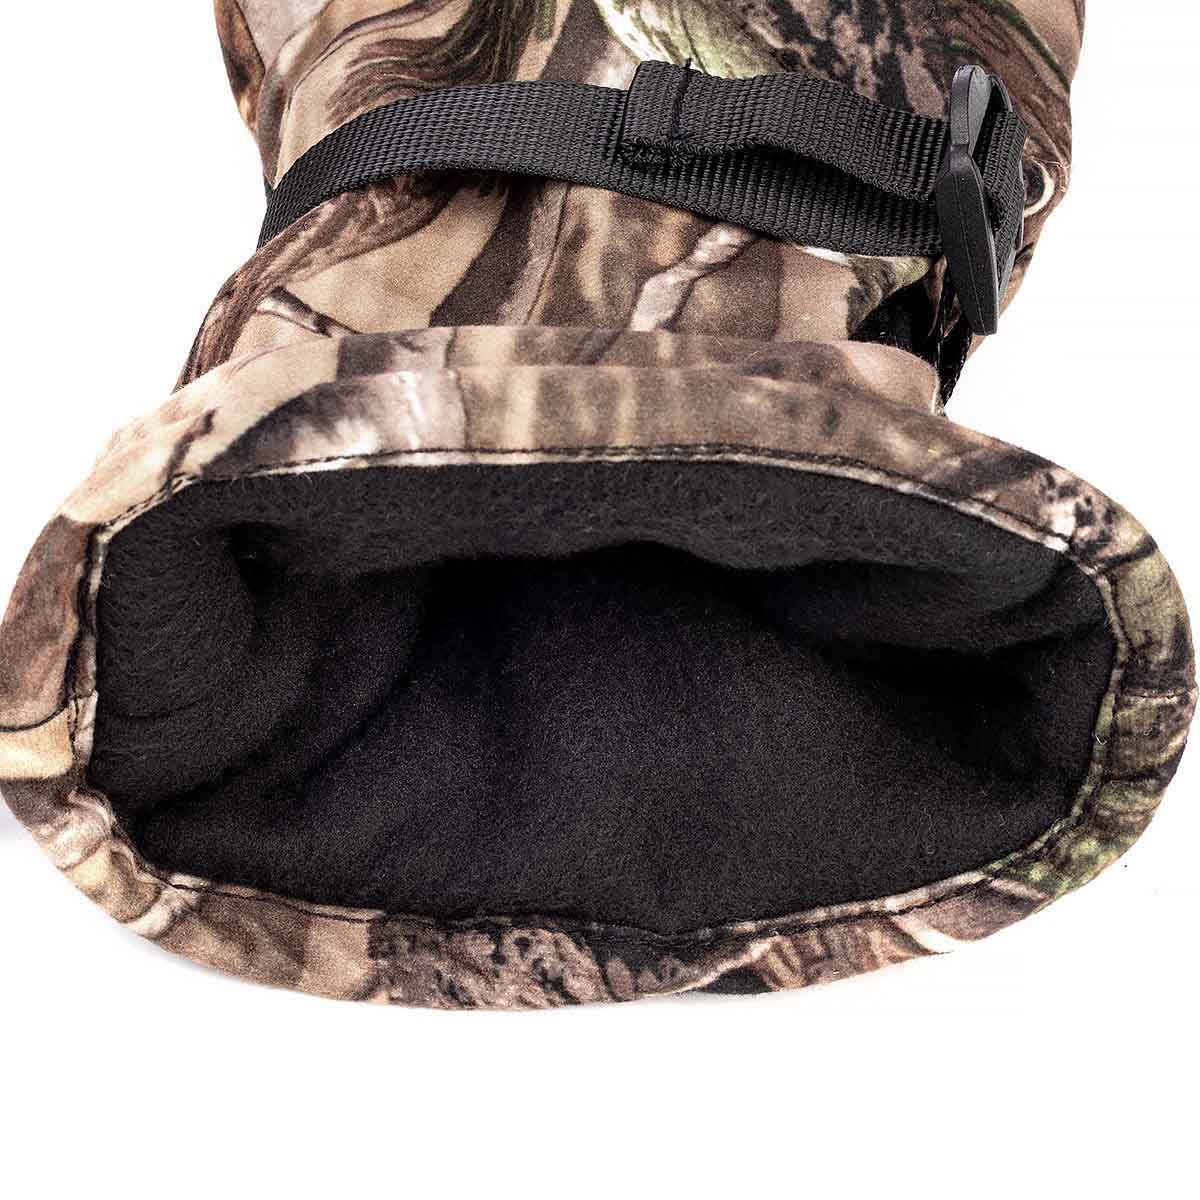 Hunting Waterproof Gloves for Men are insulated with hollow fiber